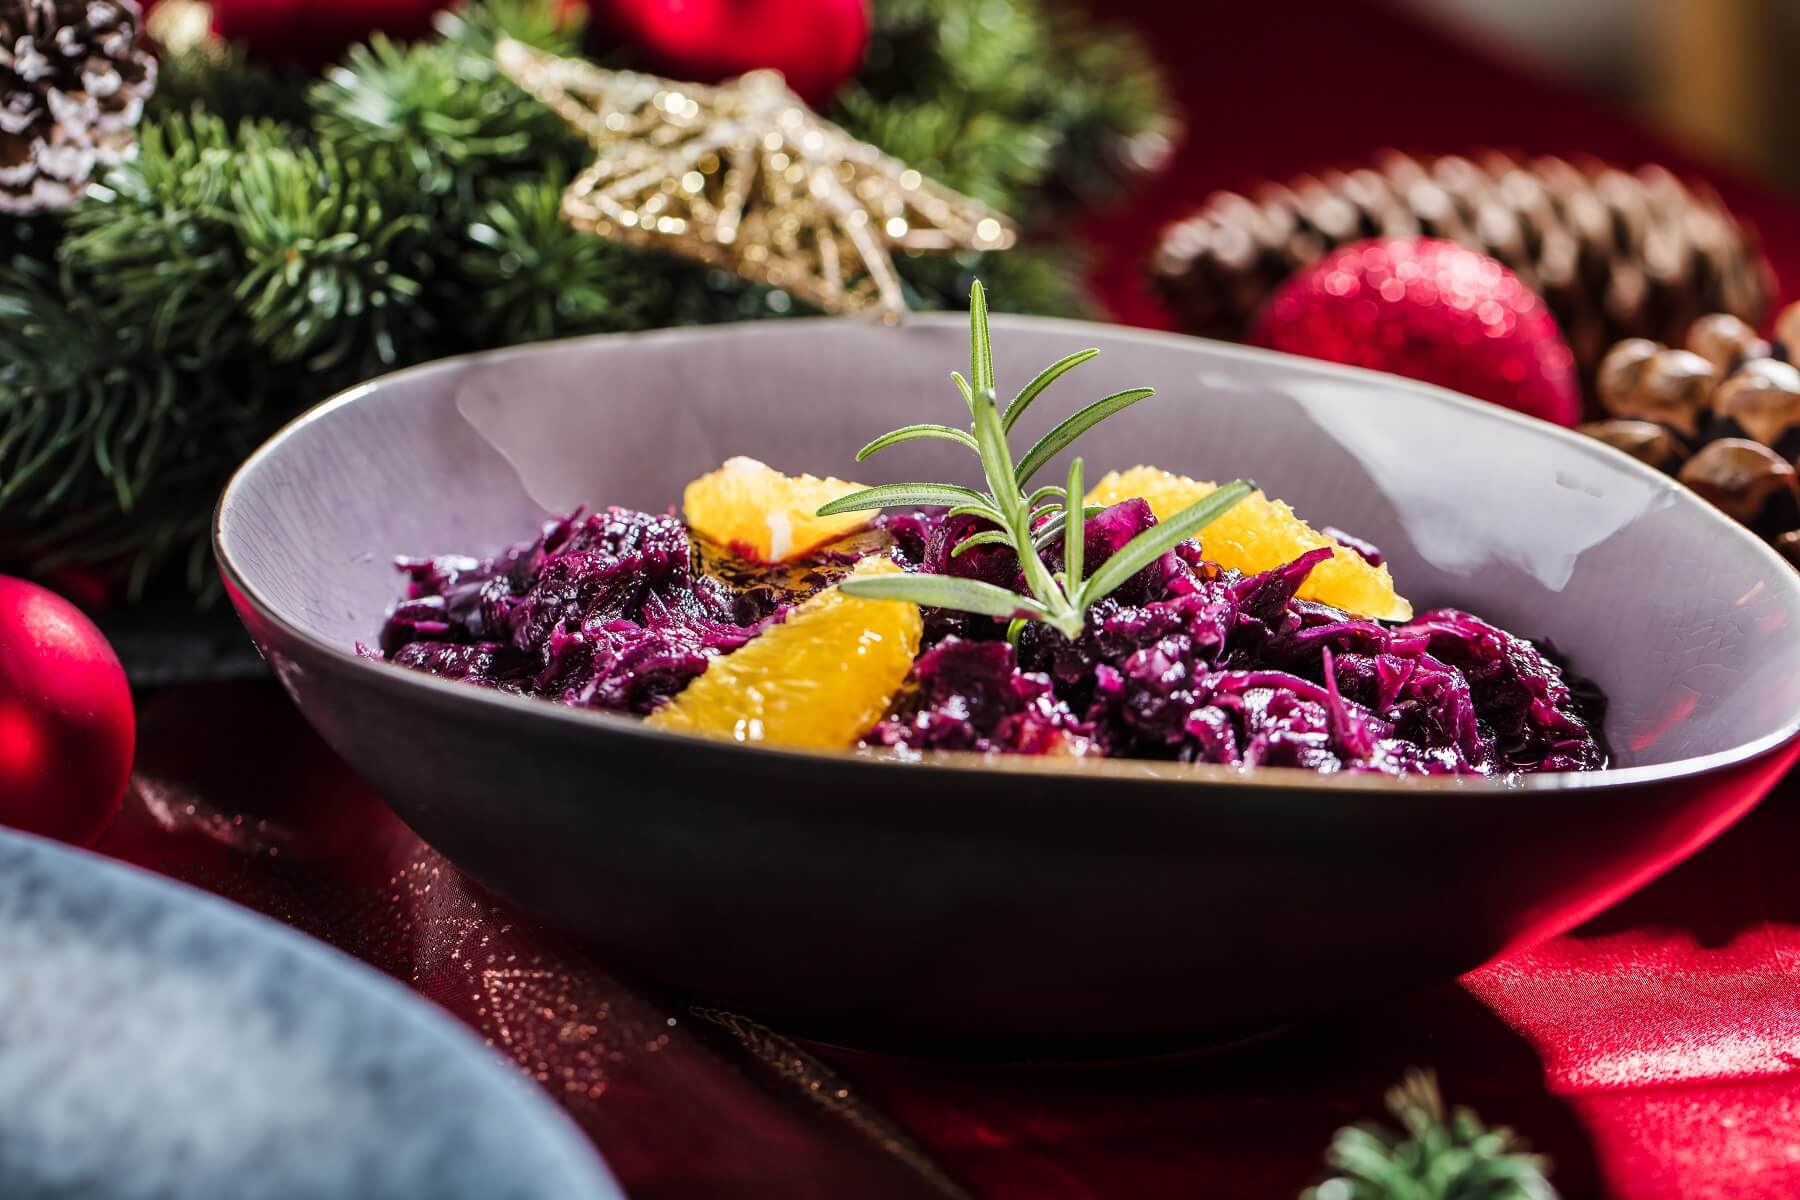 How To Cook With Red Cabbage: 8 Delicious Ways